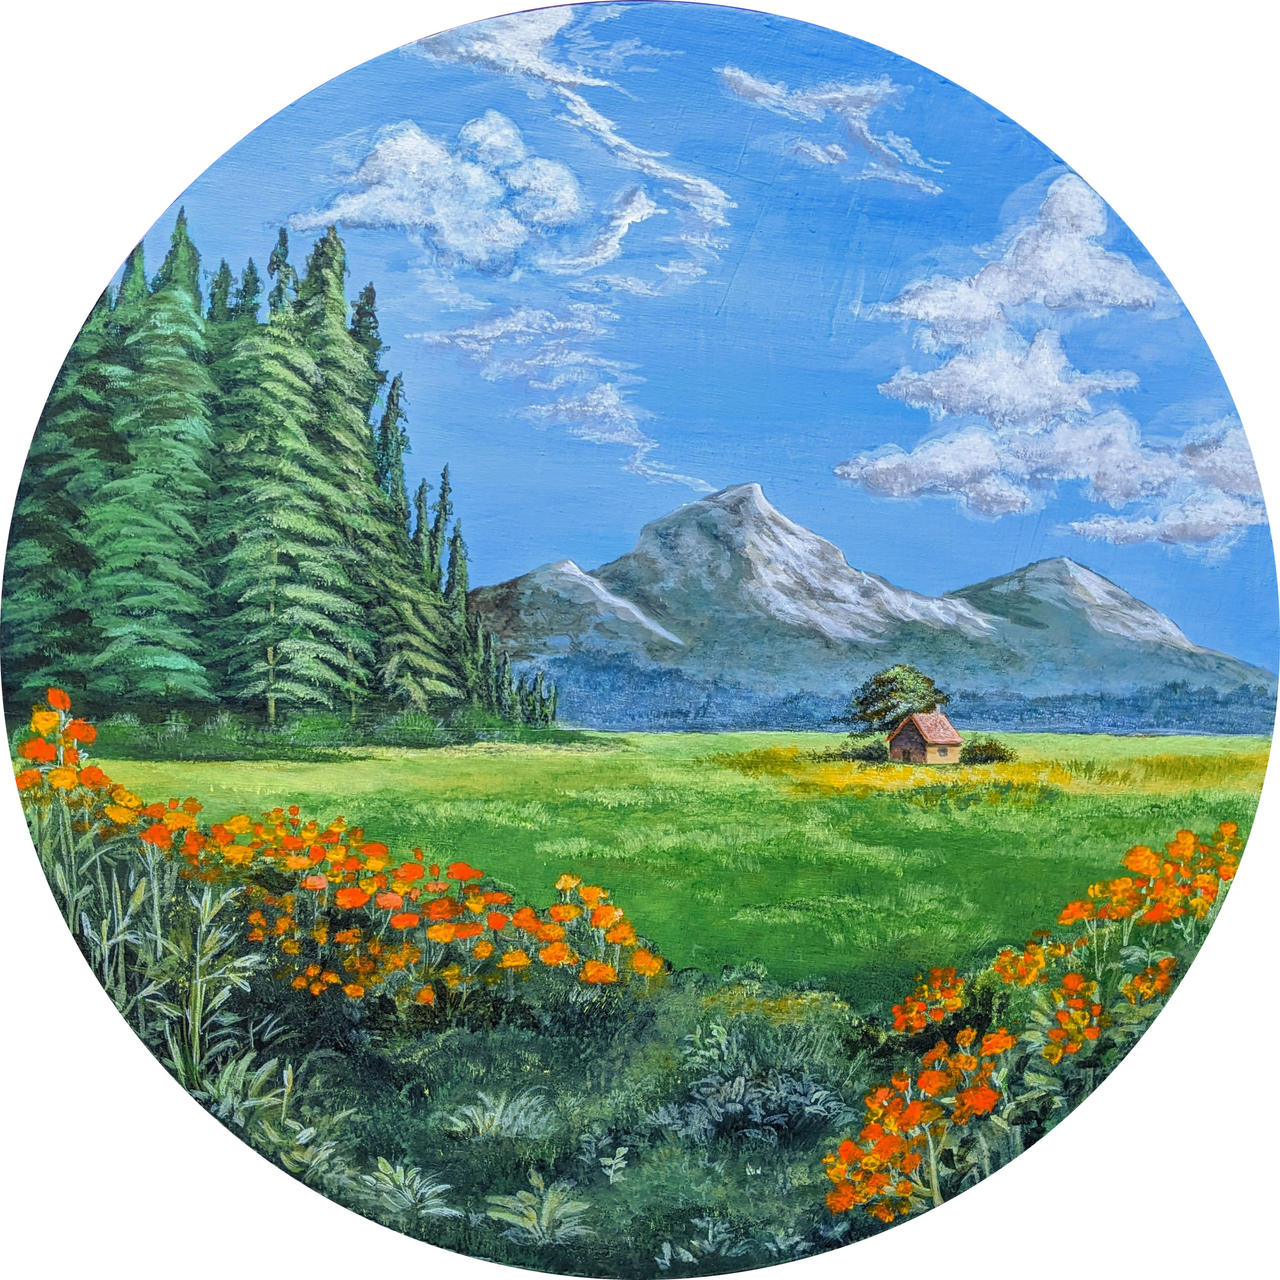 First Landscape Acrylic Painting on a round canvas by AnmolArt on DeviantArt